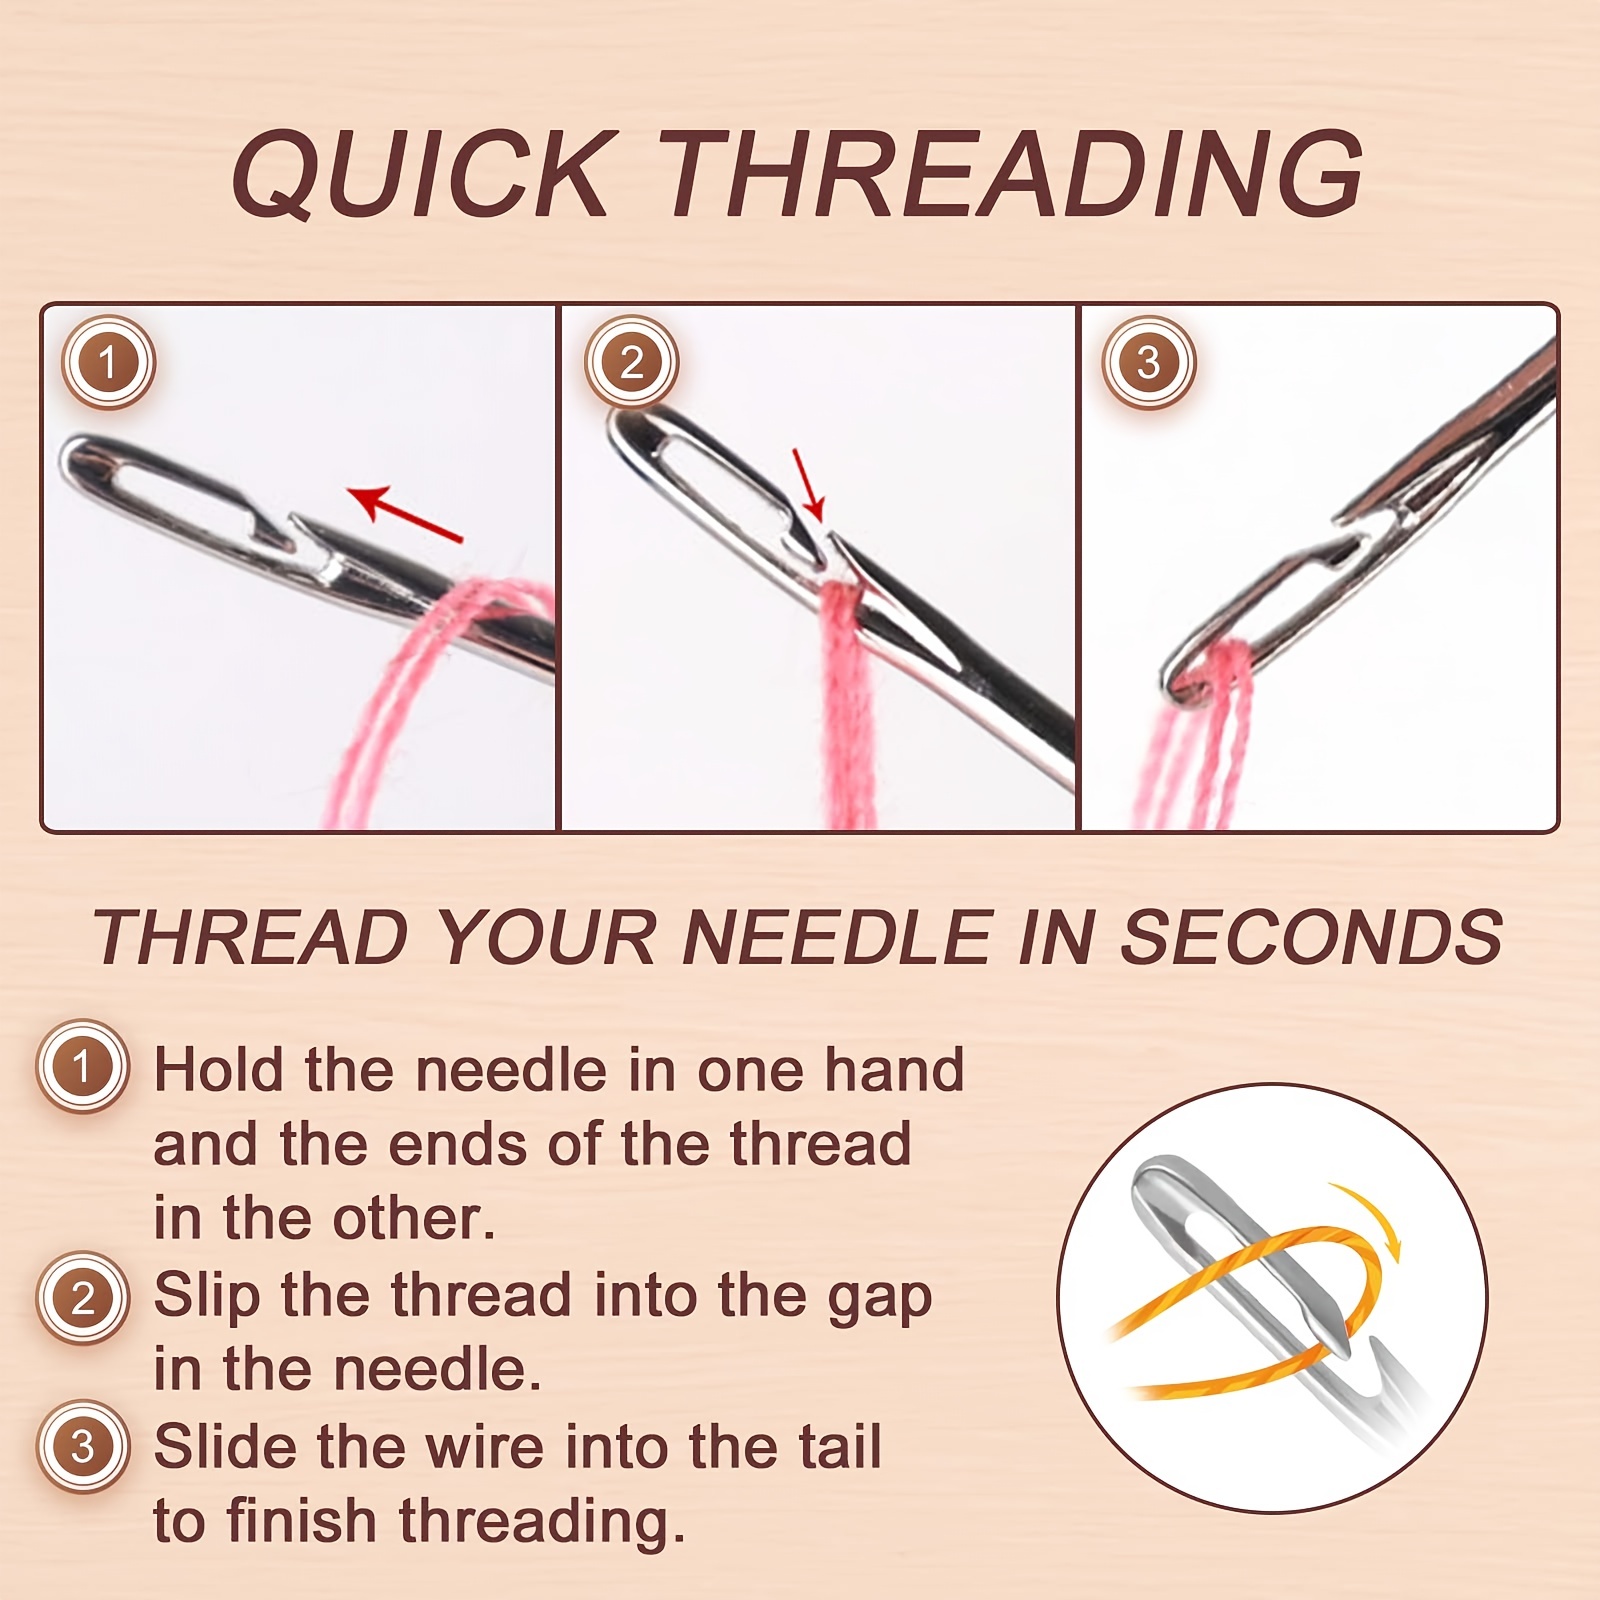 Self Threading Needles for Hand Sewing - 24 Pieces Embroidery Thread  Needles,Easy Thread Needles for Hand Sewing,Side Threading Needle for  Quilting